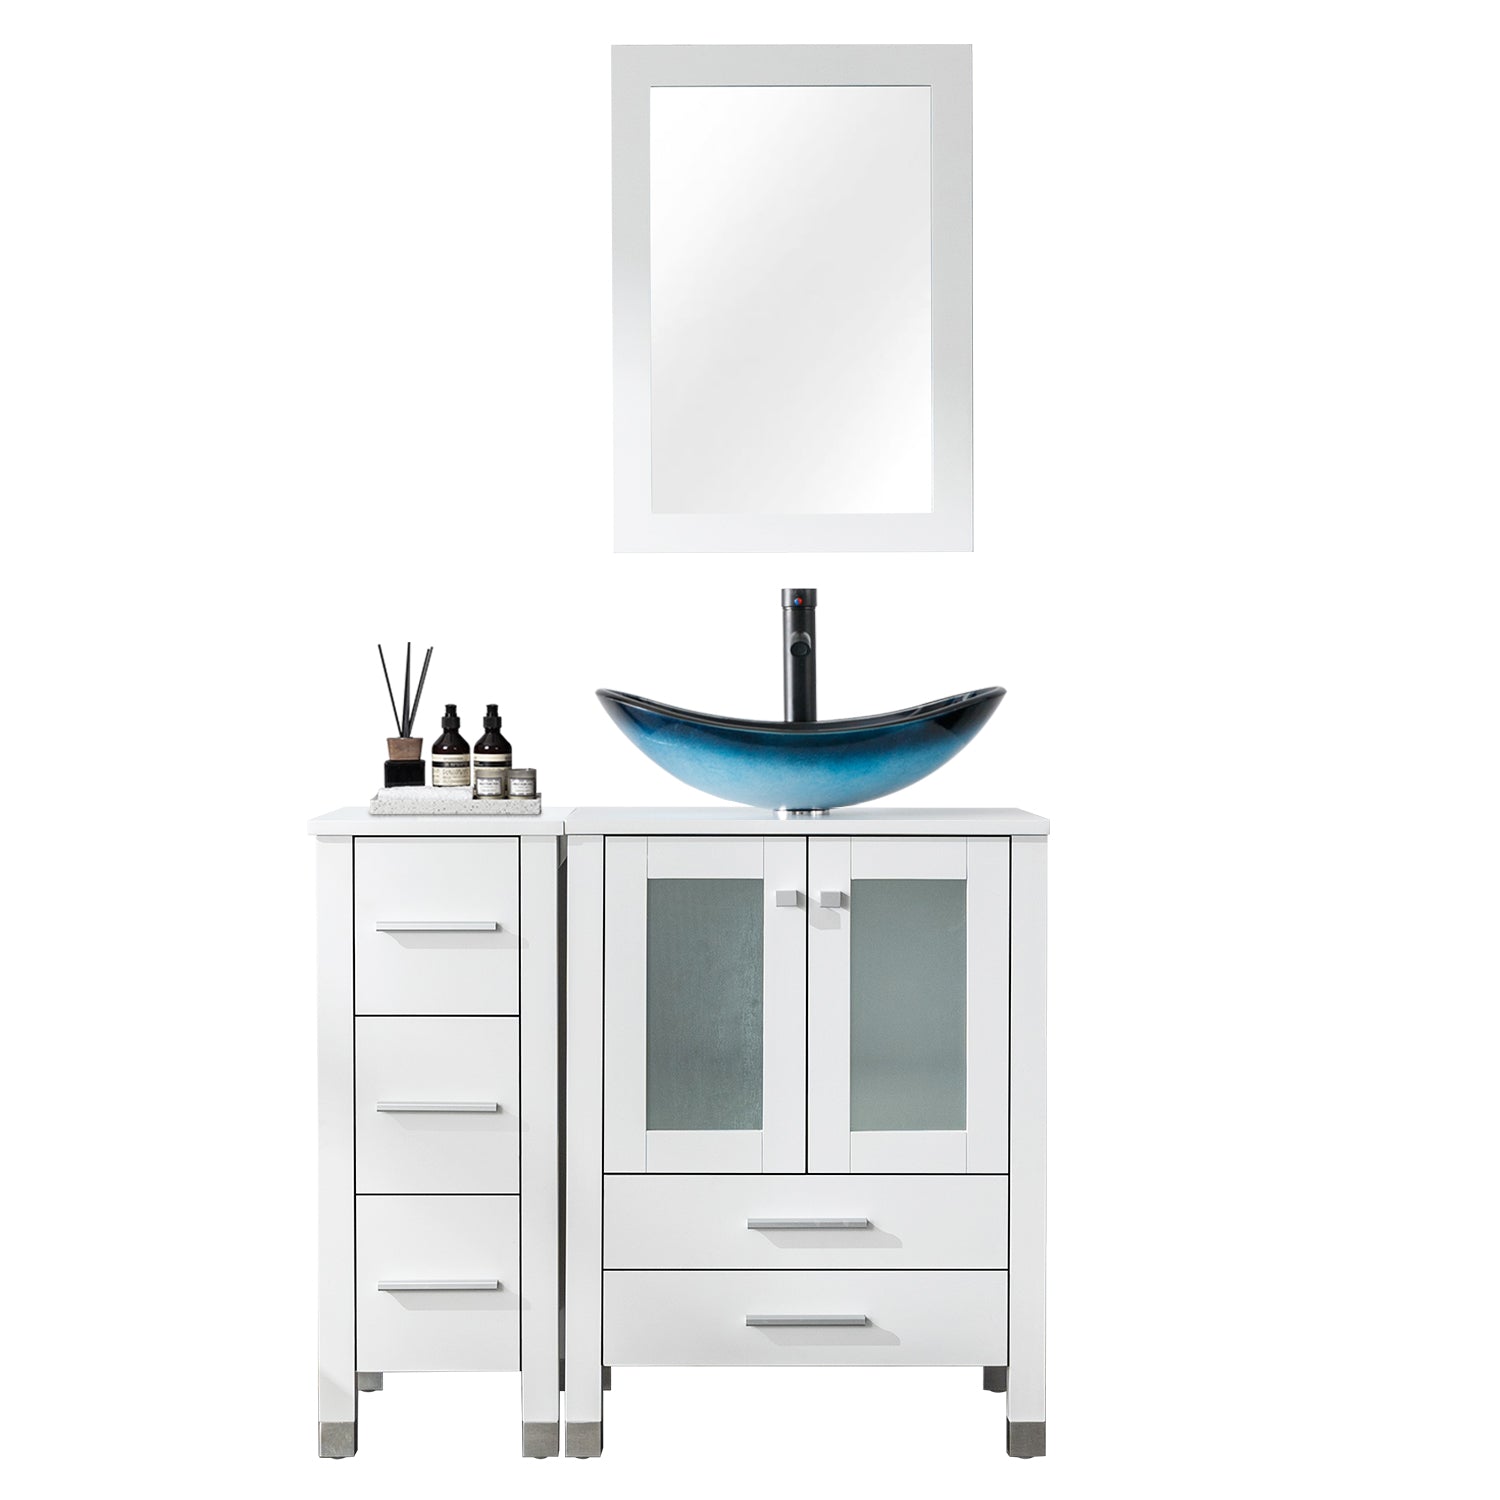 Eclife 36" Bathroom Vanity Sink Combo, Solid Wood Construction and Painted Frame - White